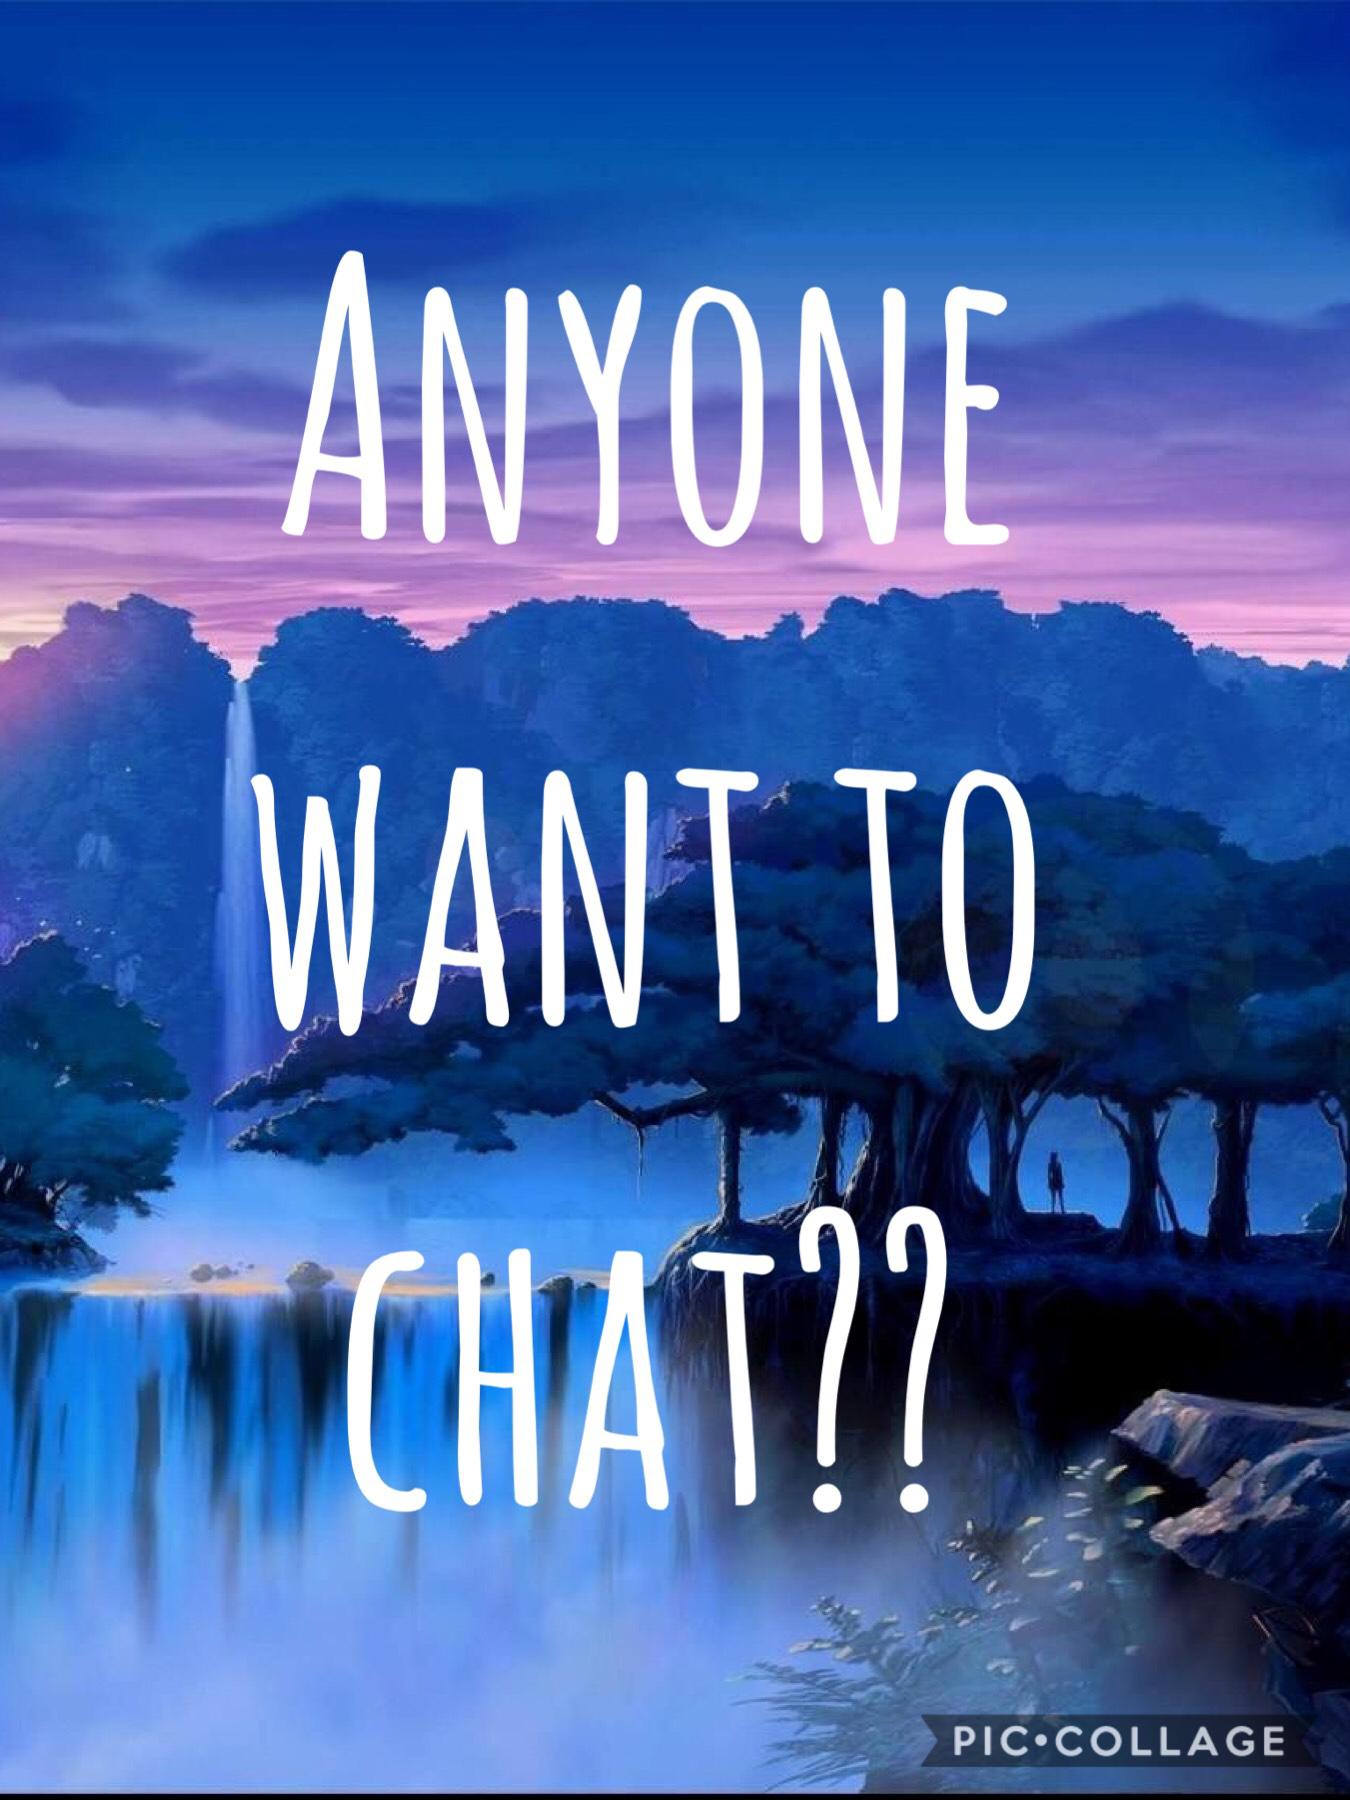 Anyone want to chat?? I’am bored 